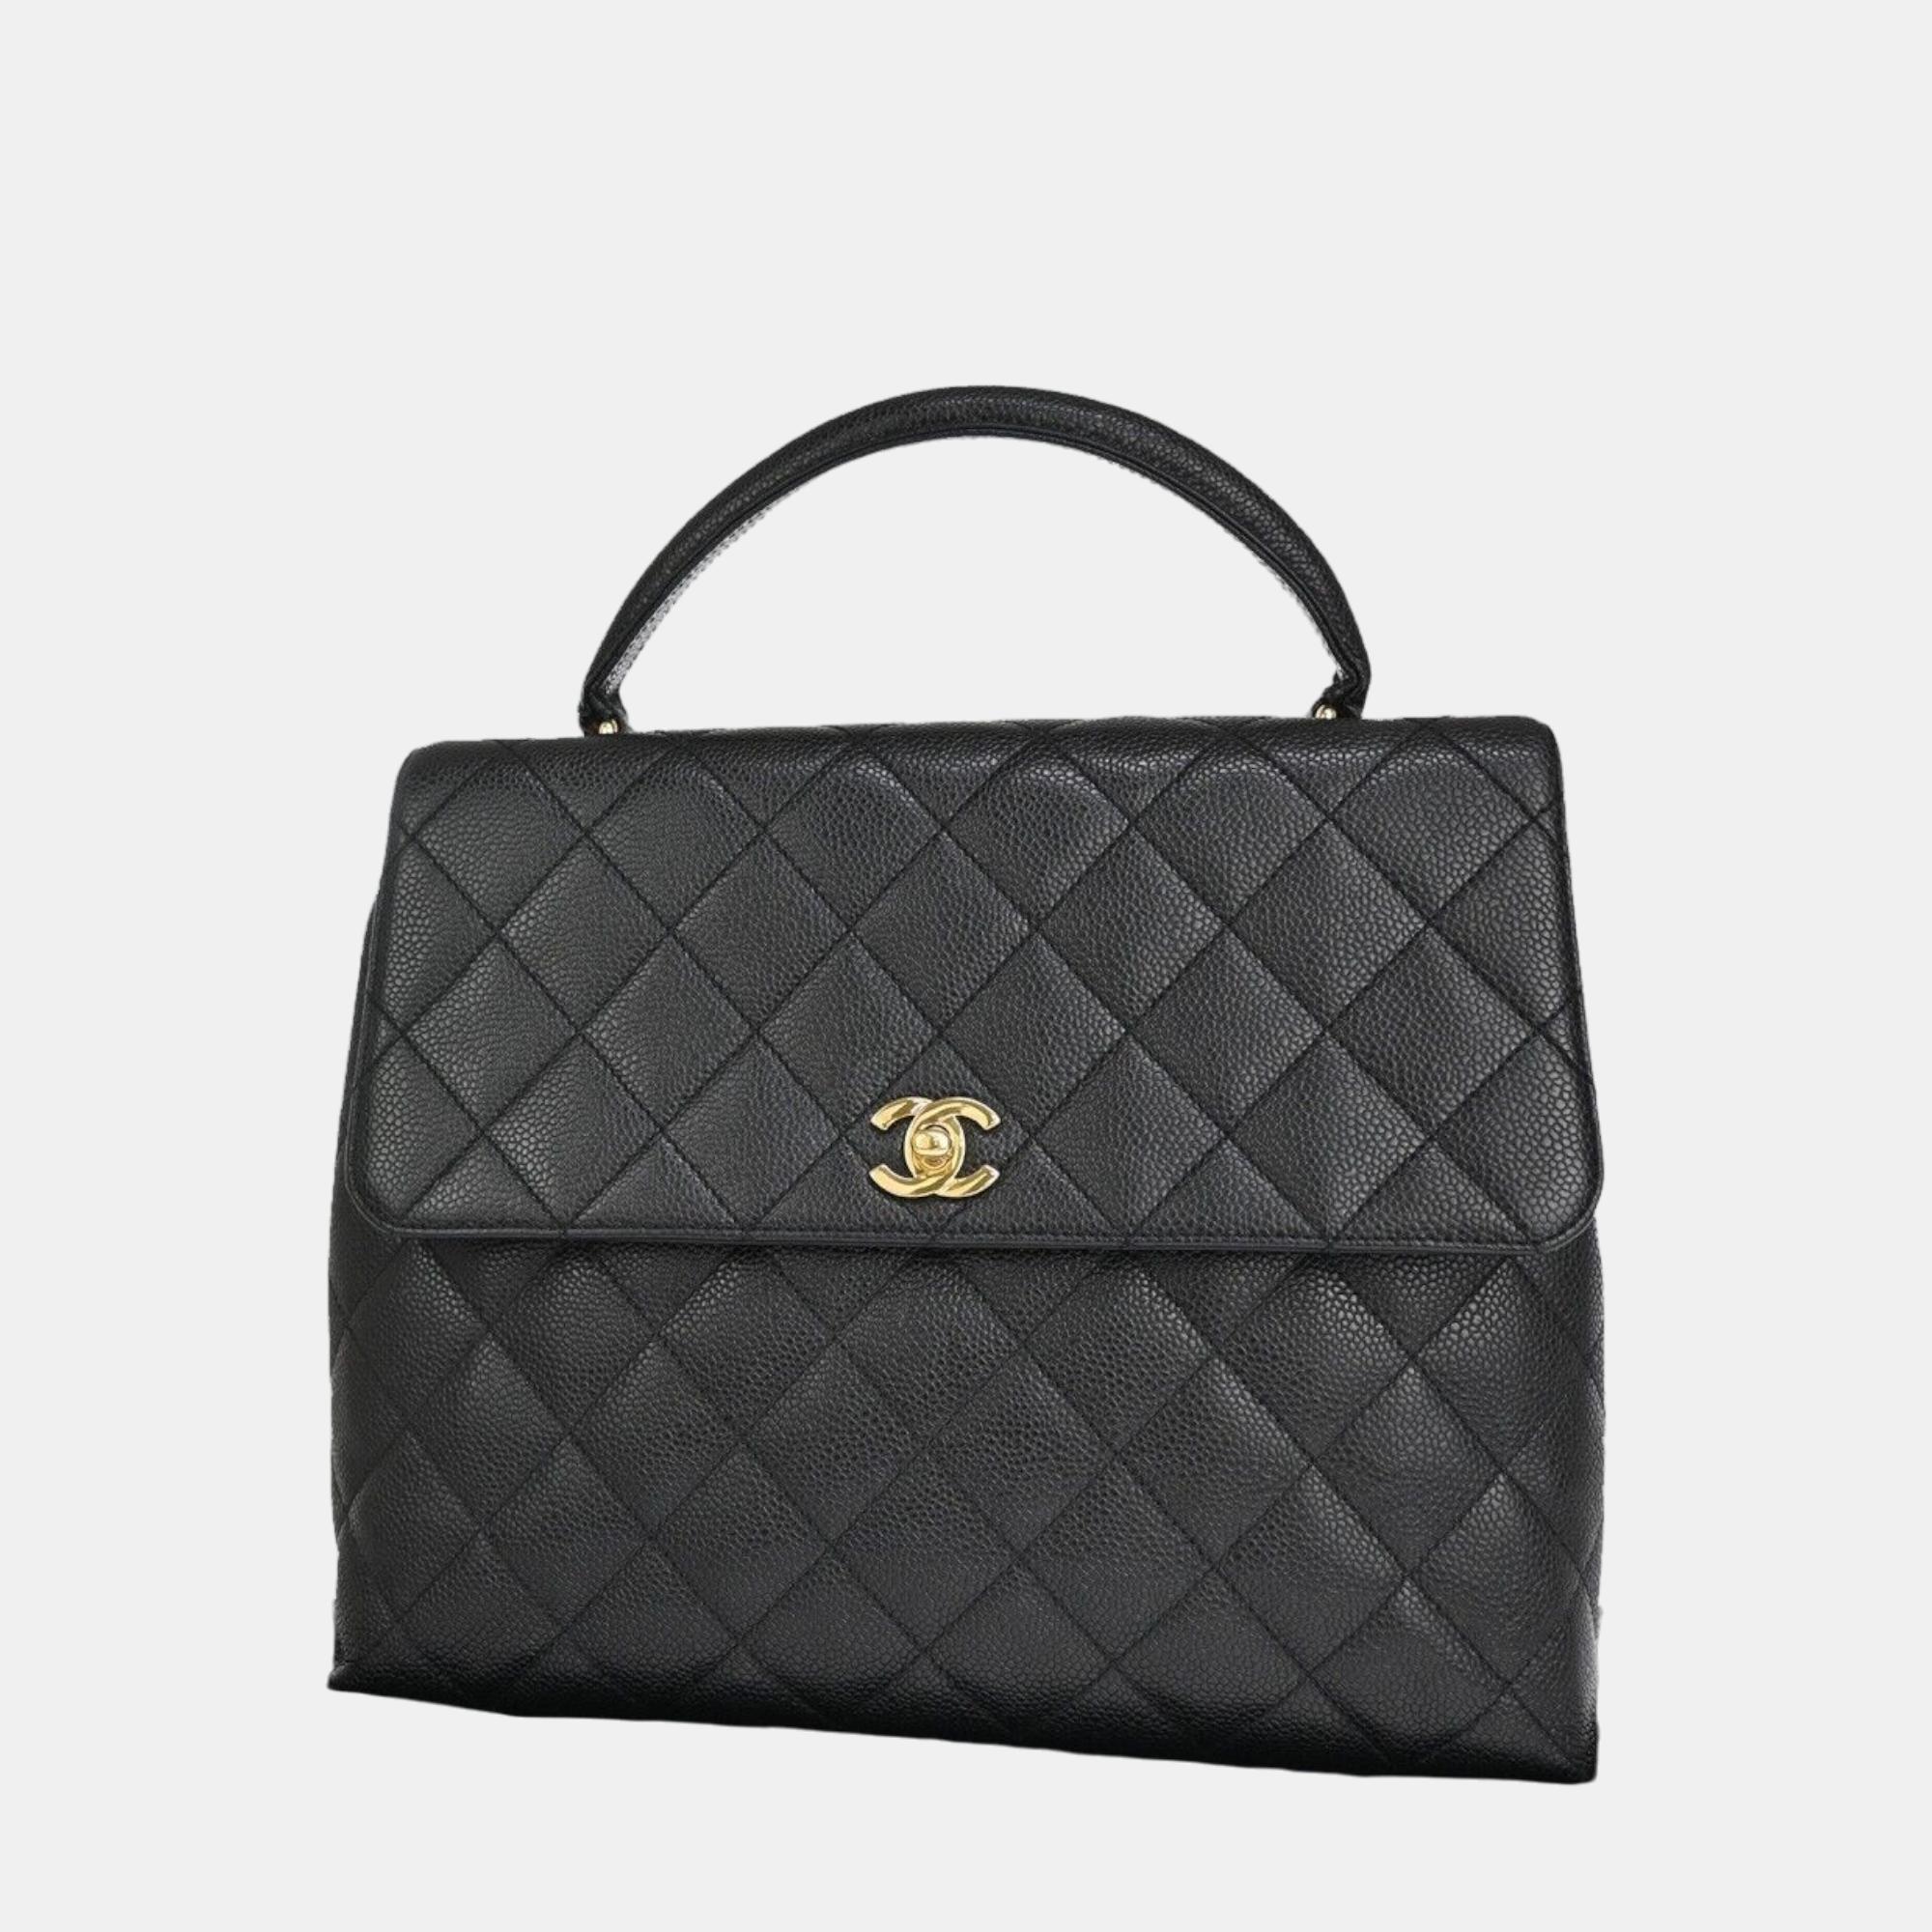 Chanel black leather small kelly top handle bags